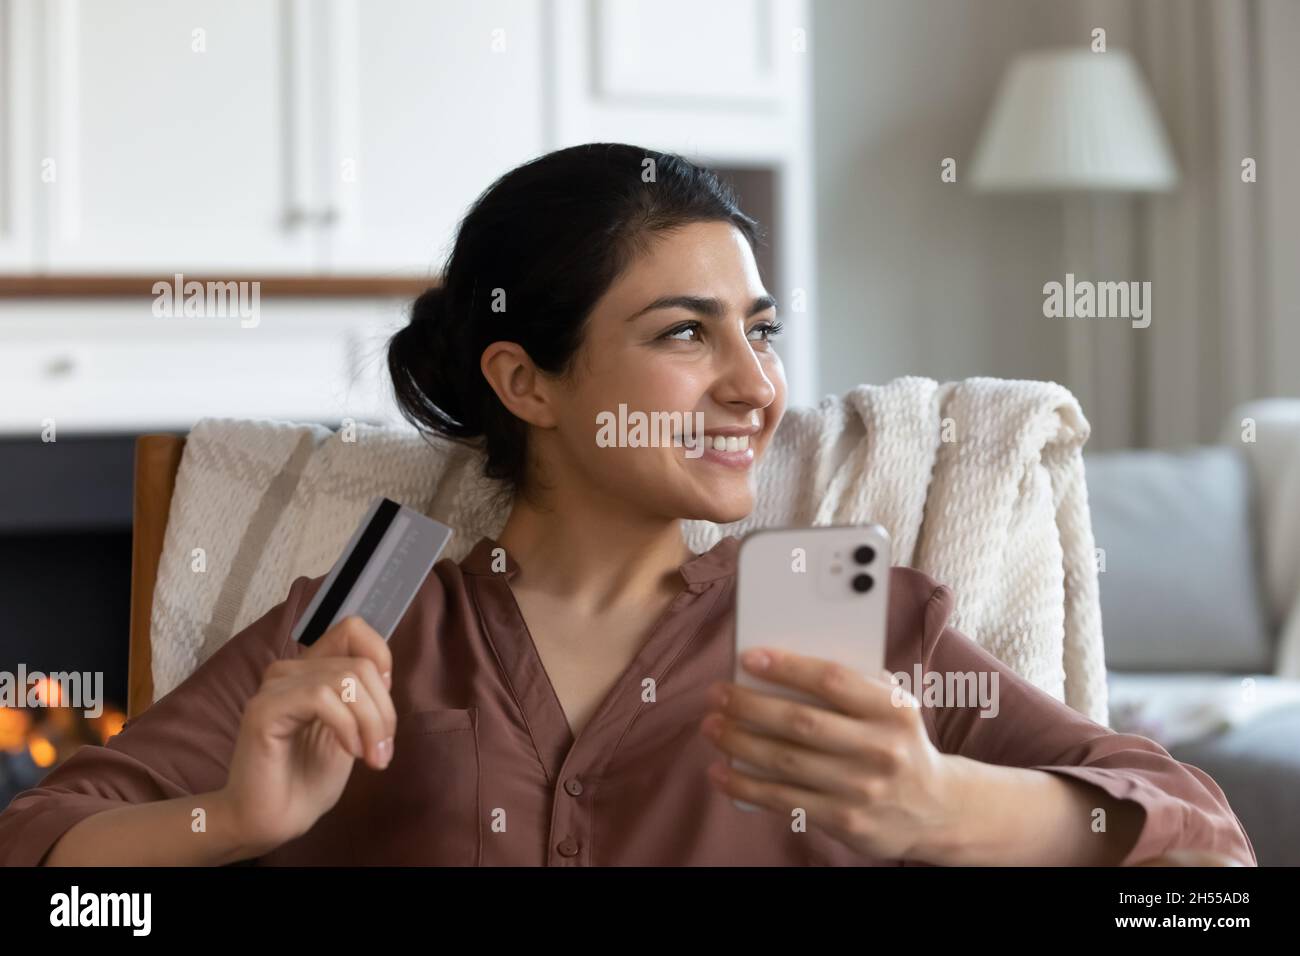 indian woman holds credit card and smartphone buying goods online 2H55AD8